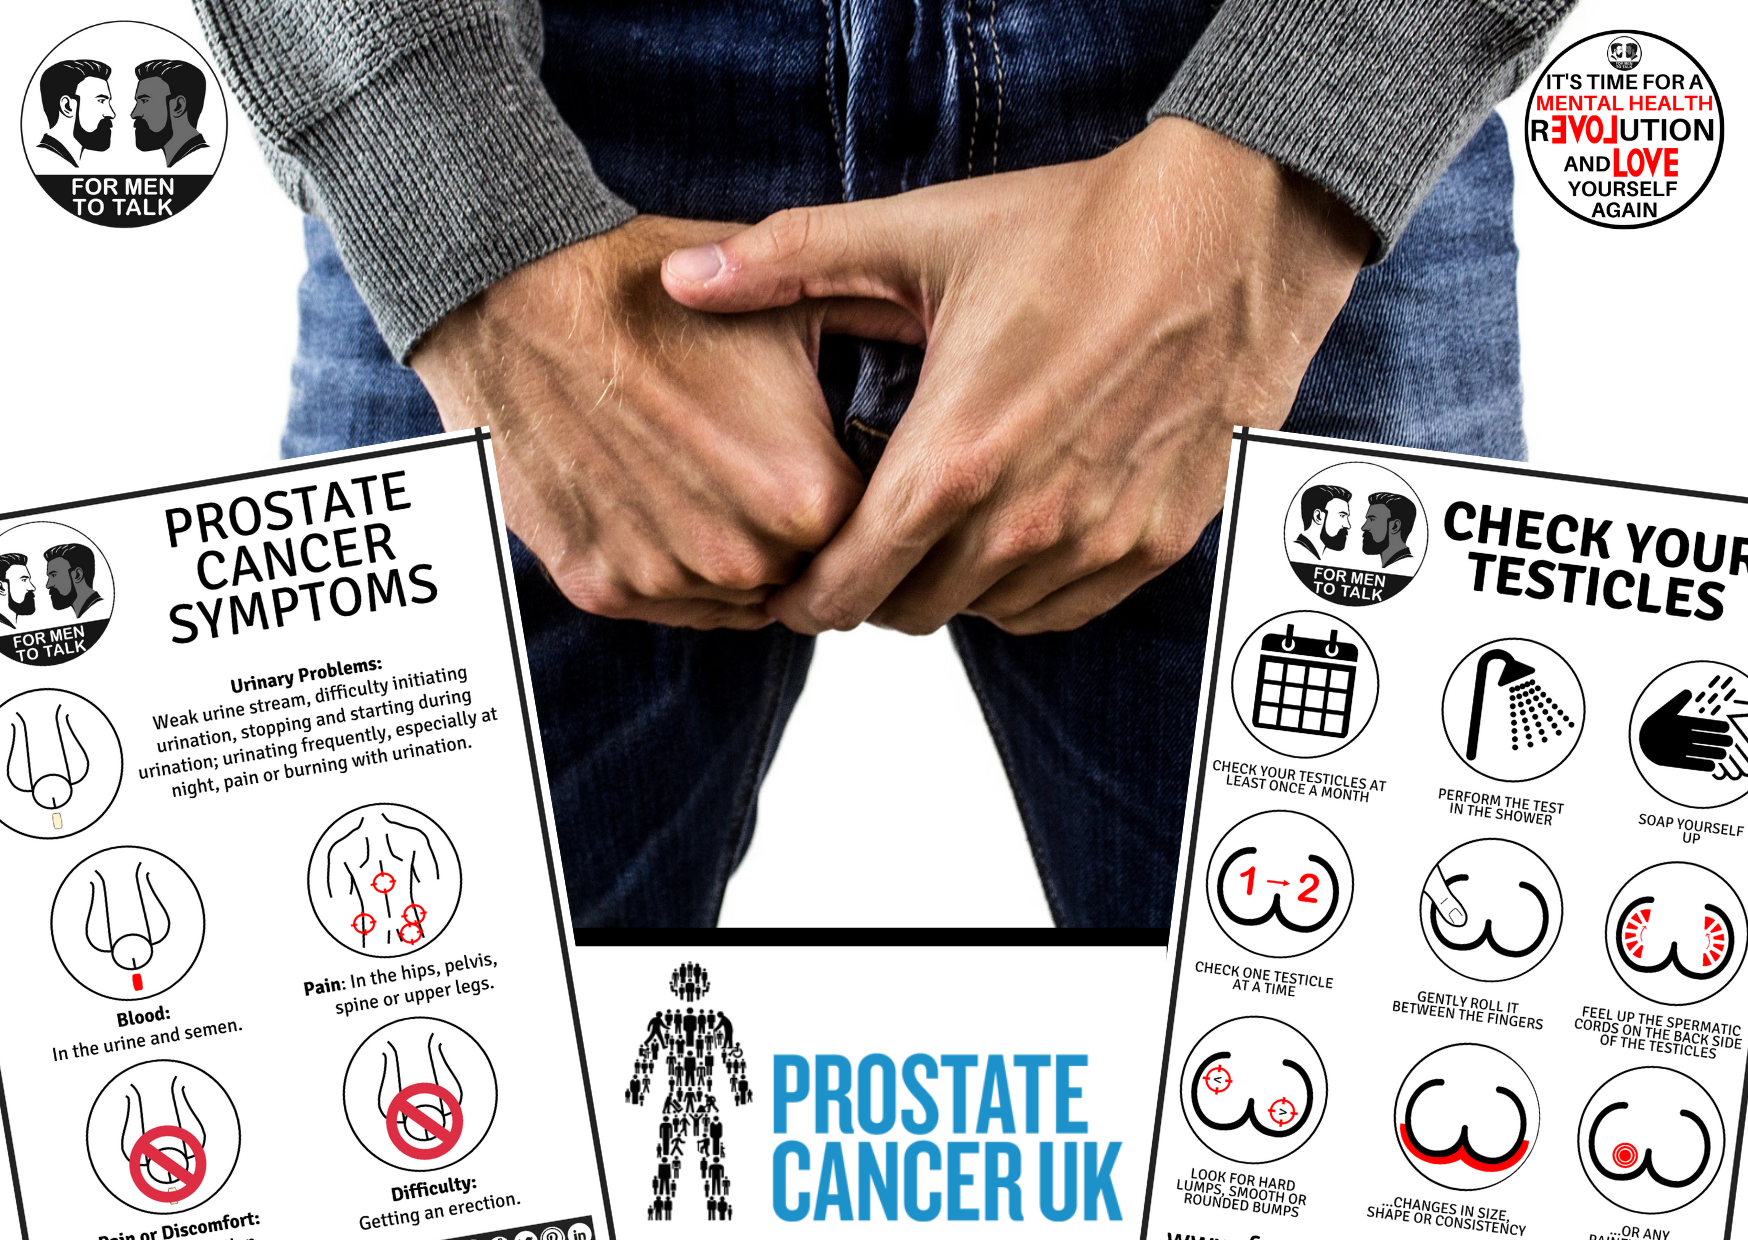 Prostate and Testicular Cancer – The Signs!